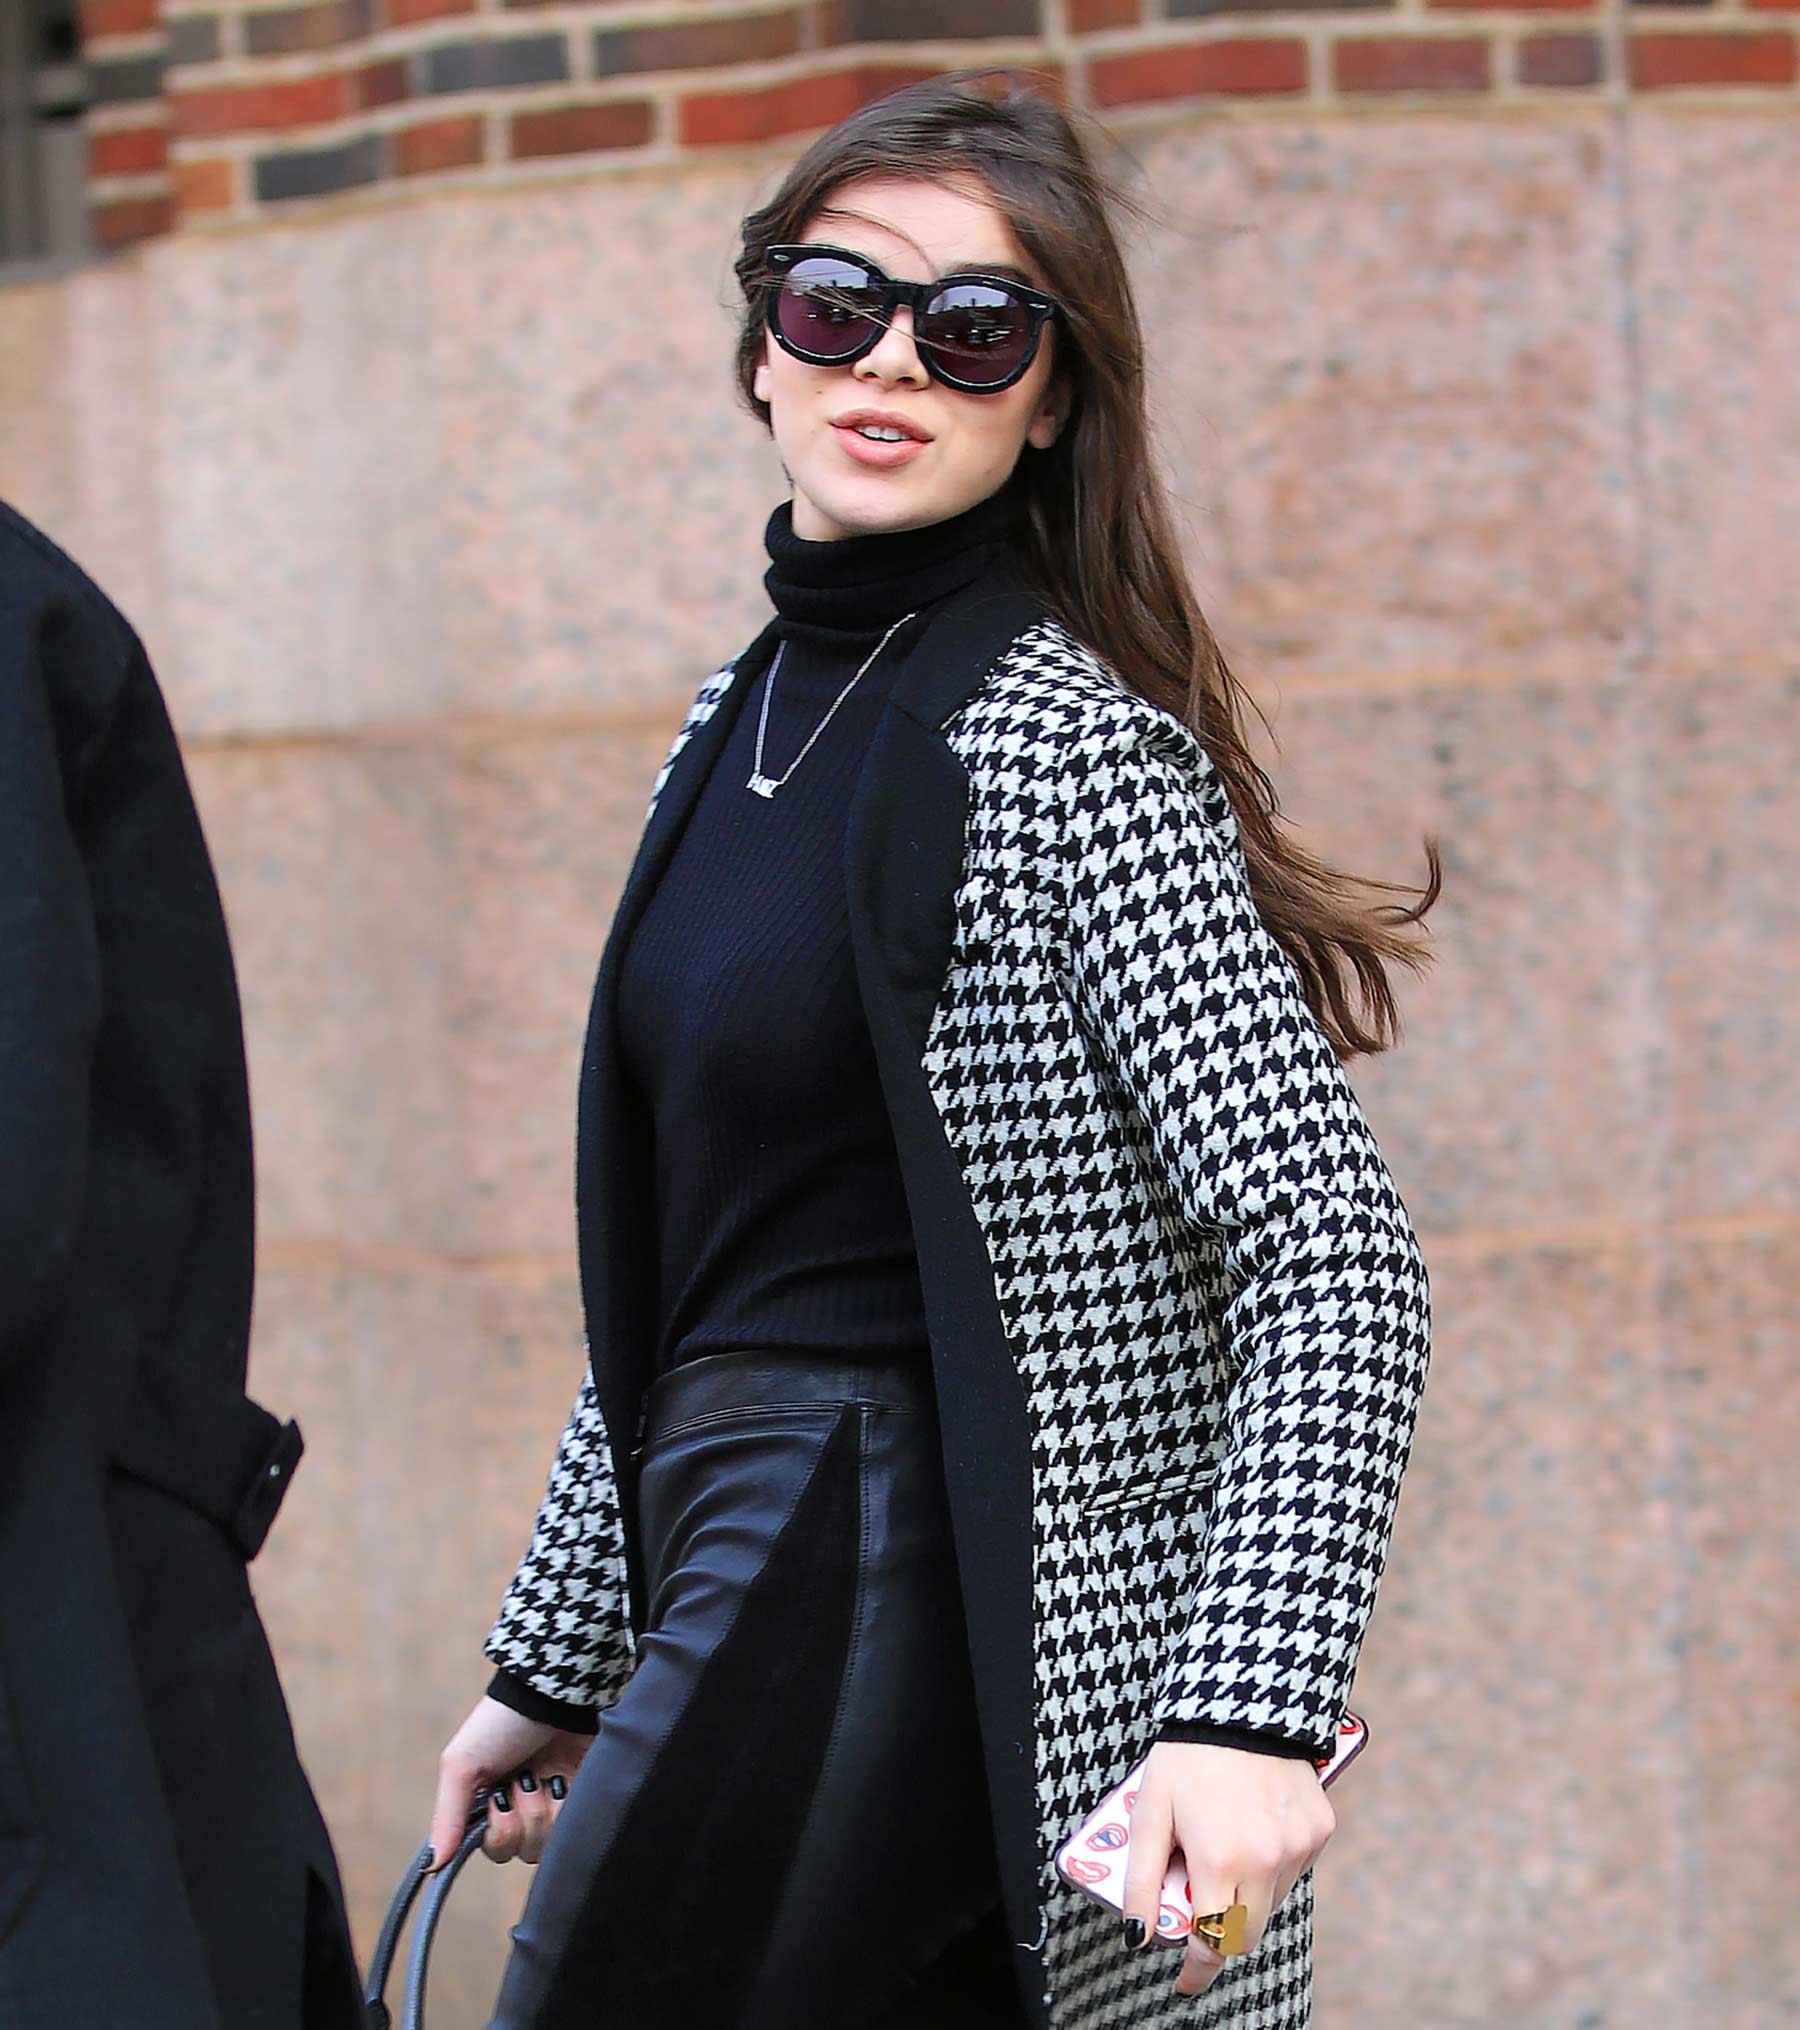 Hailee Steinfeld out in New York City